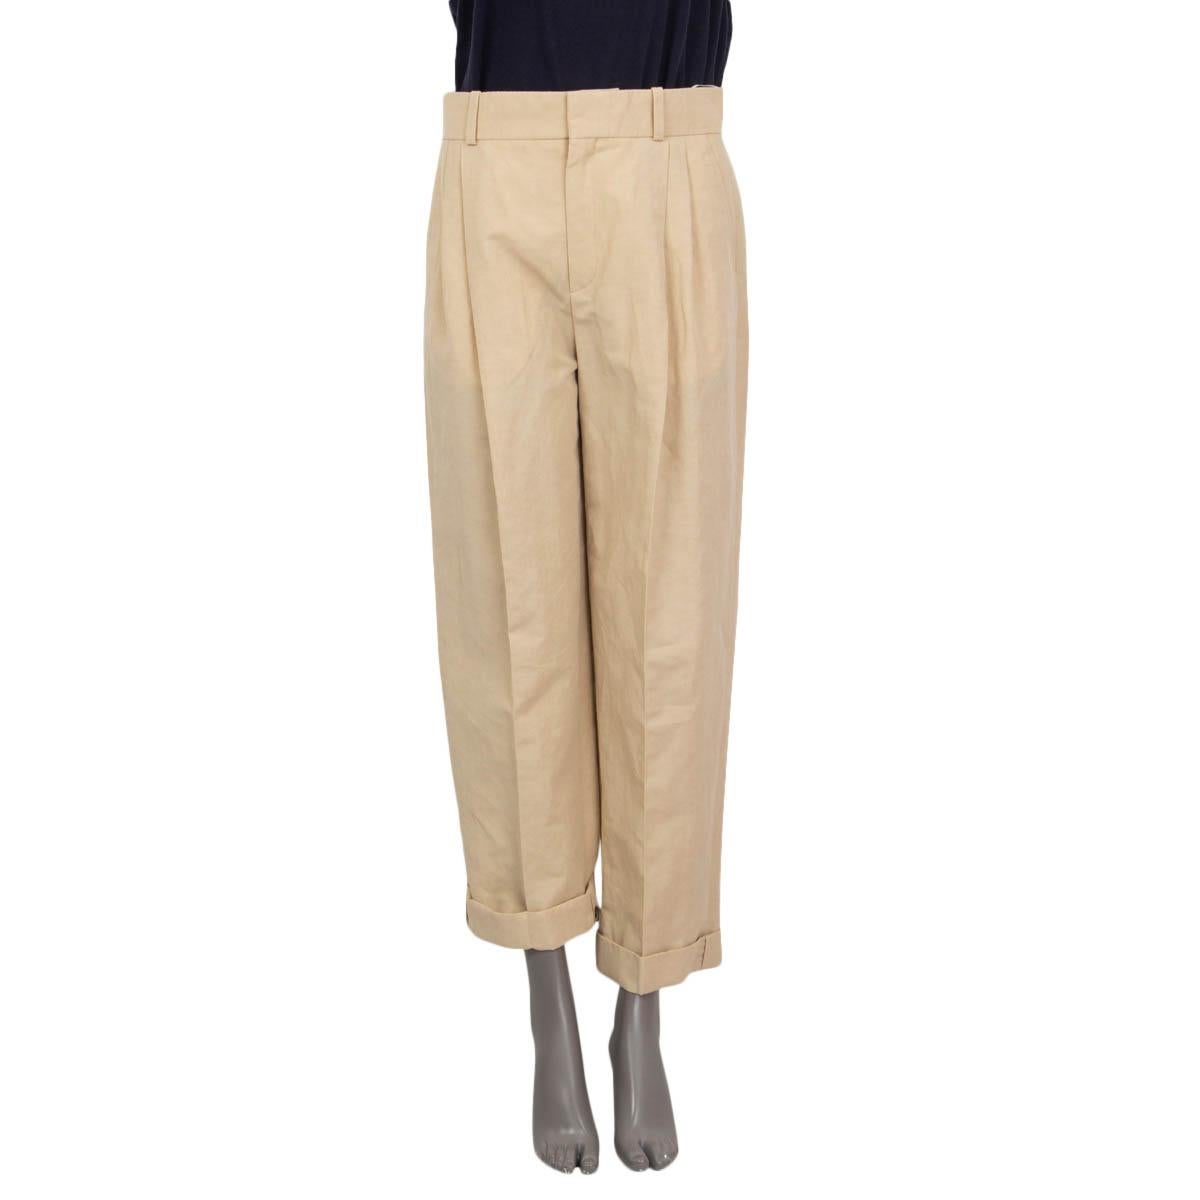 100% authentic Chloé cropped and pleated pants in soften brown linen (52%) and cotton (48%). Features buttoned cuffs and belt loops. Opens with hooks, zipper and a button on the front. Lined in beige cotton (100%). Have been worn and are in